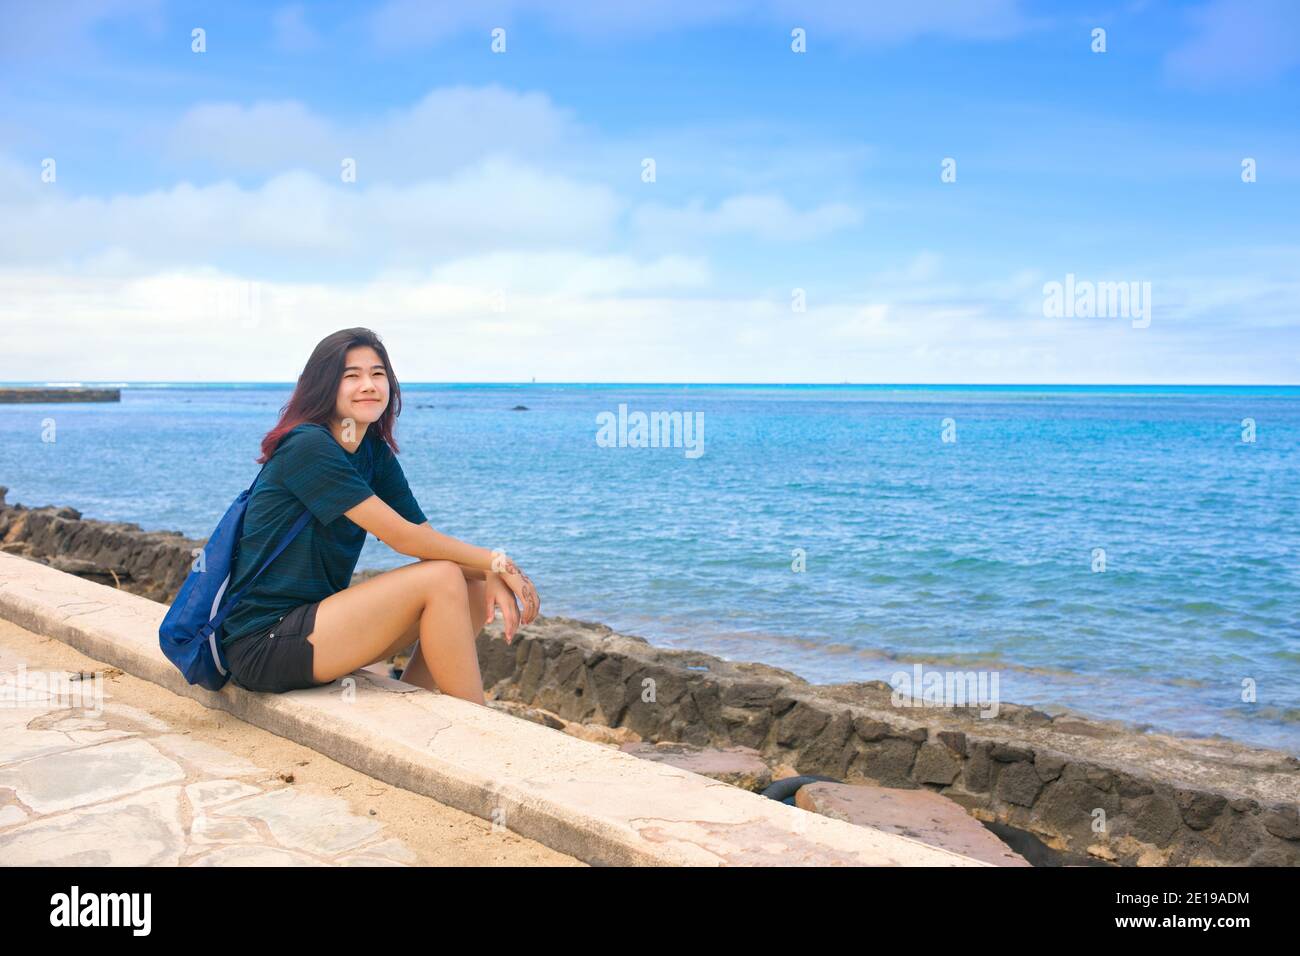 Biracial teen girl sitting on concrete walkway next to blue ocean in tropical Hawaii with blue skies and horizon in background Stock Photo